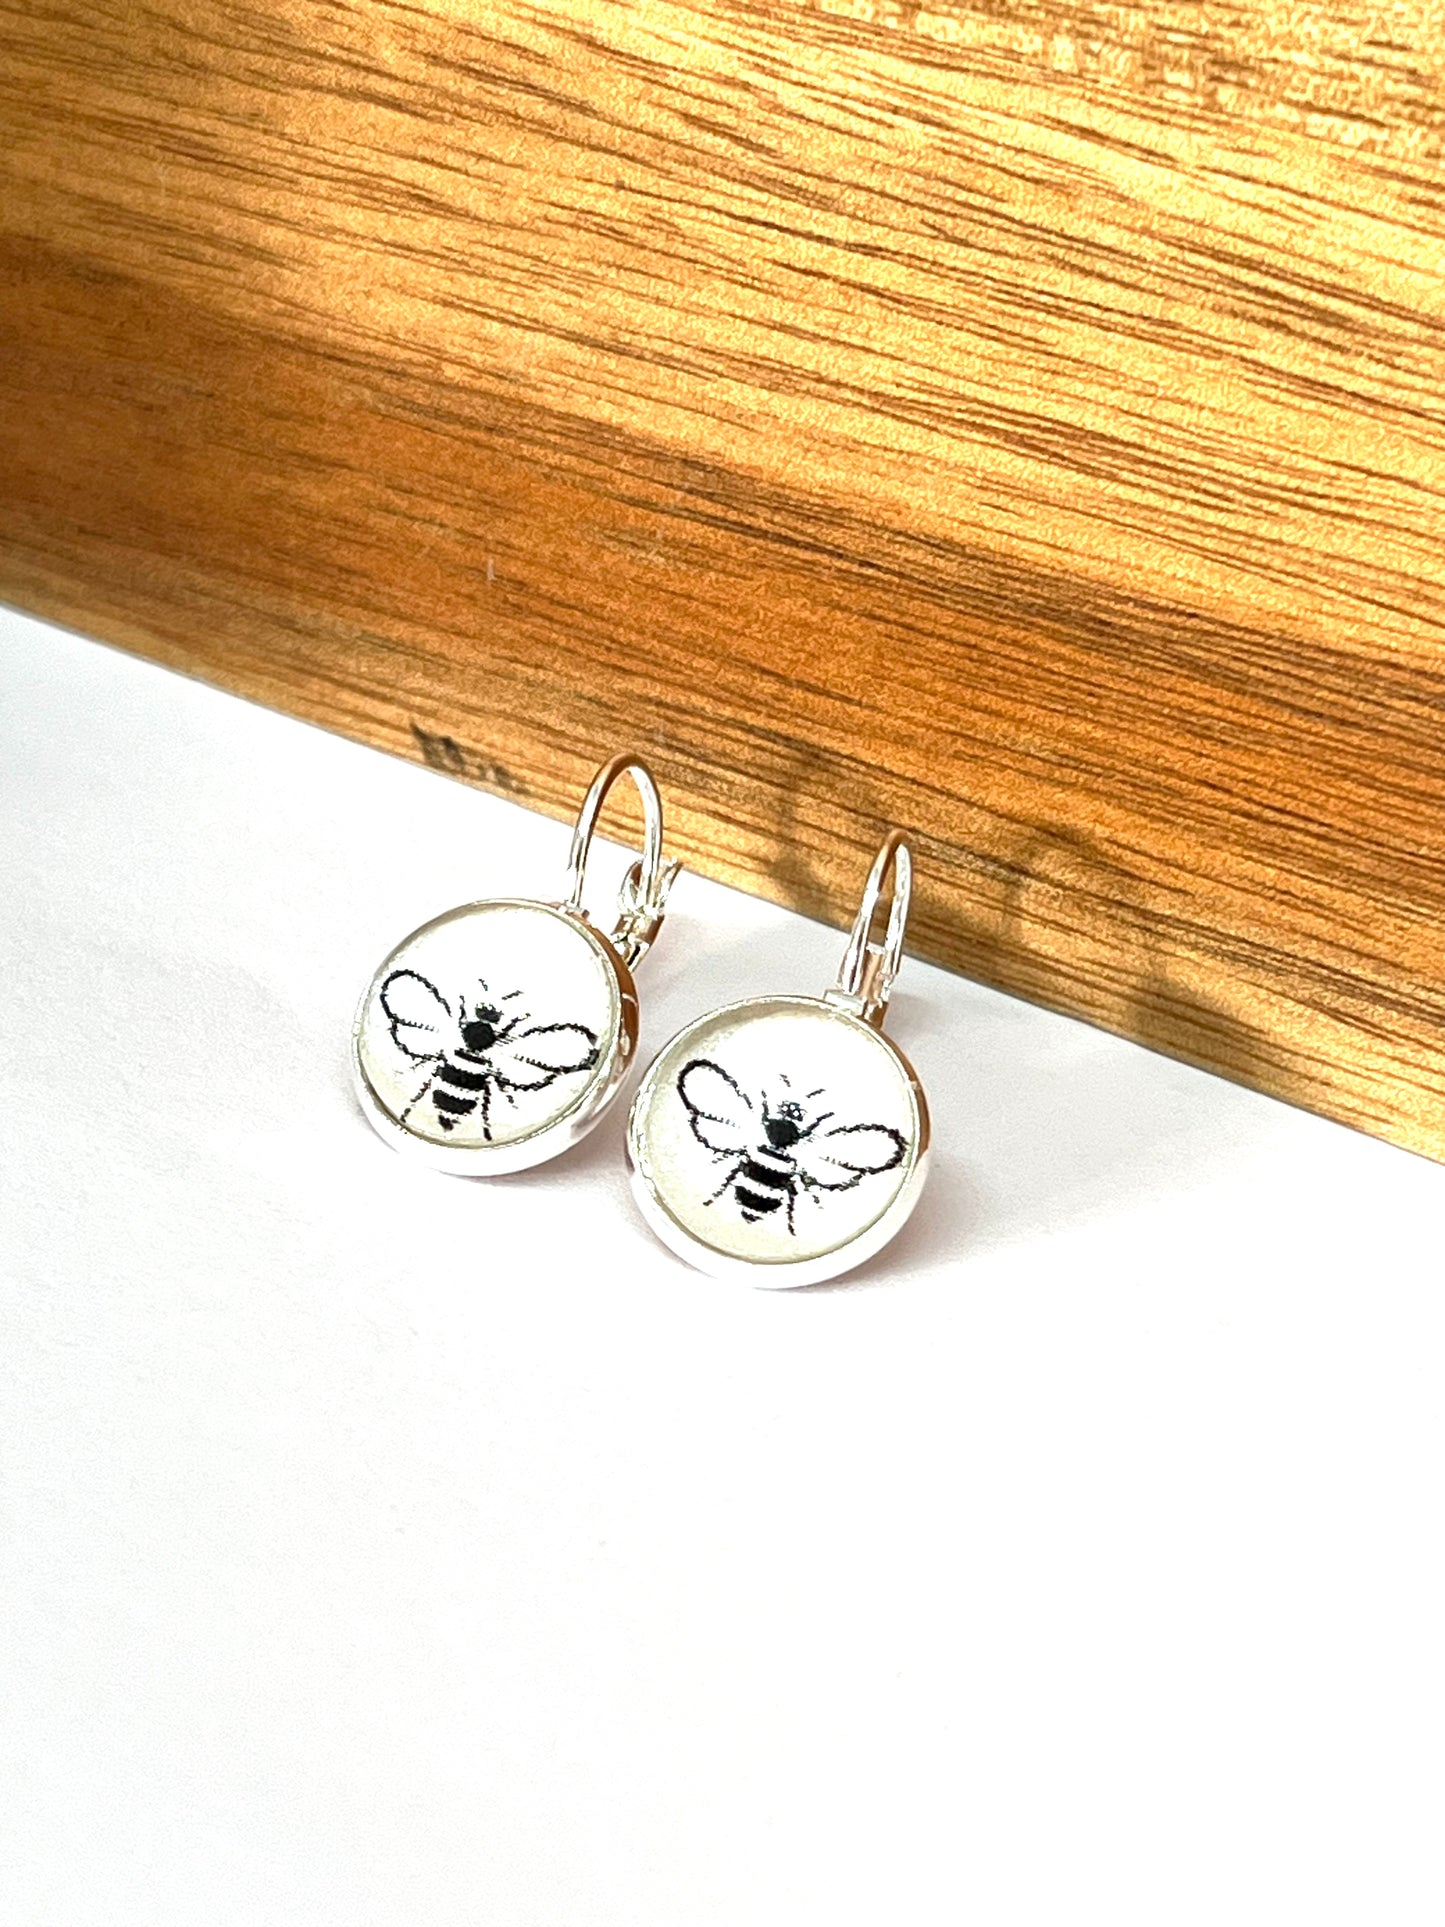 Black bees on a pearl white background glass dome earrings